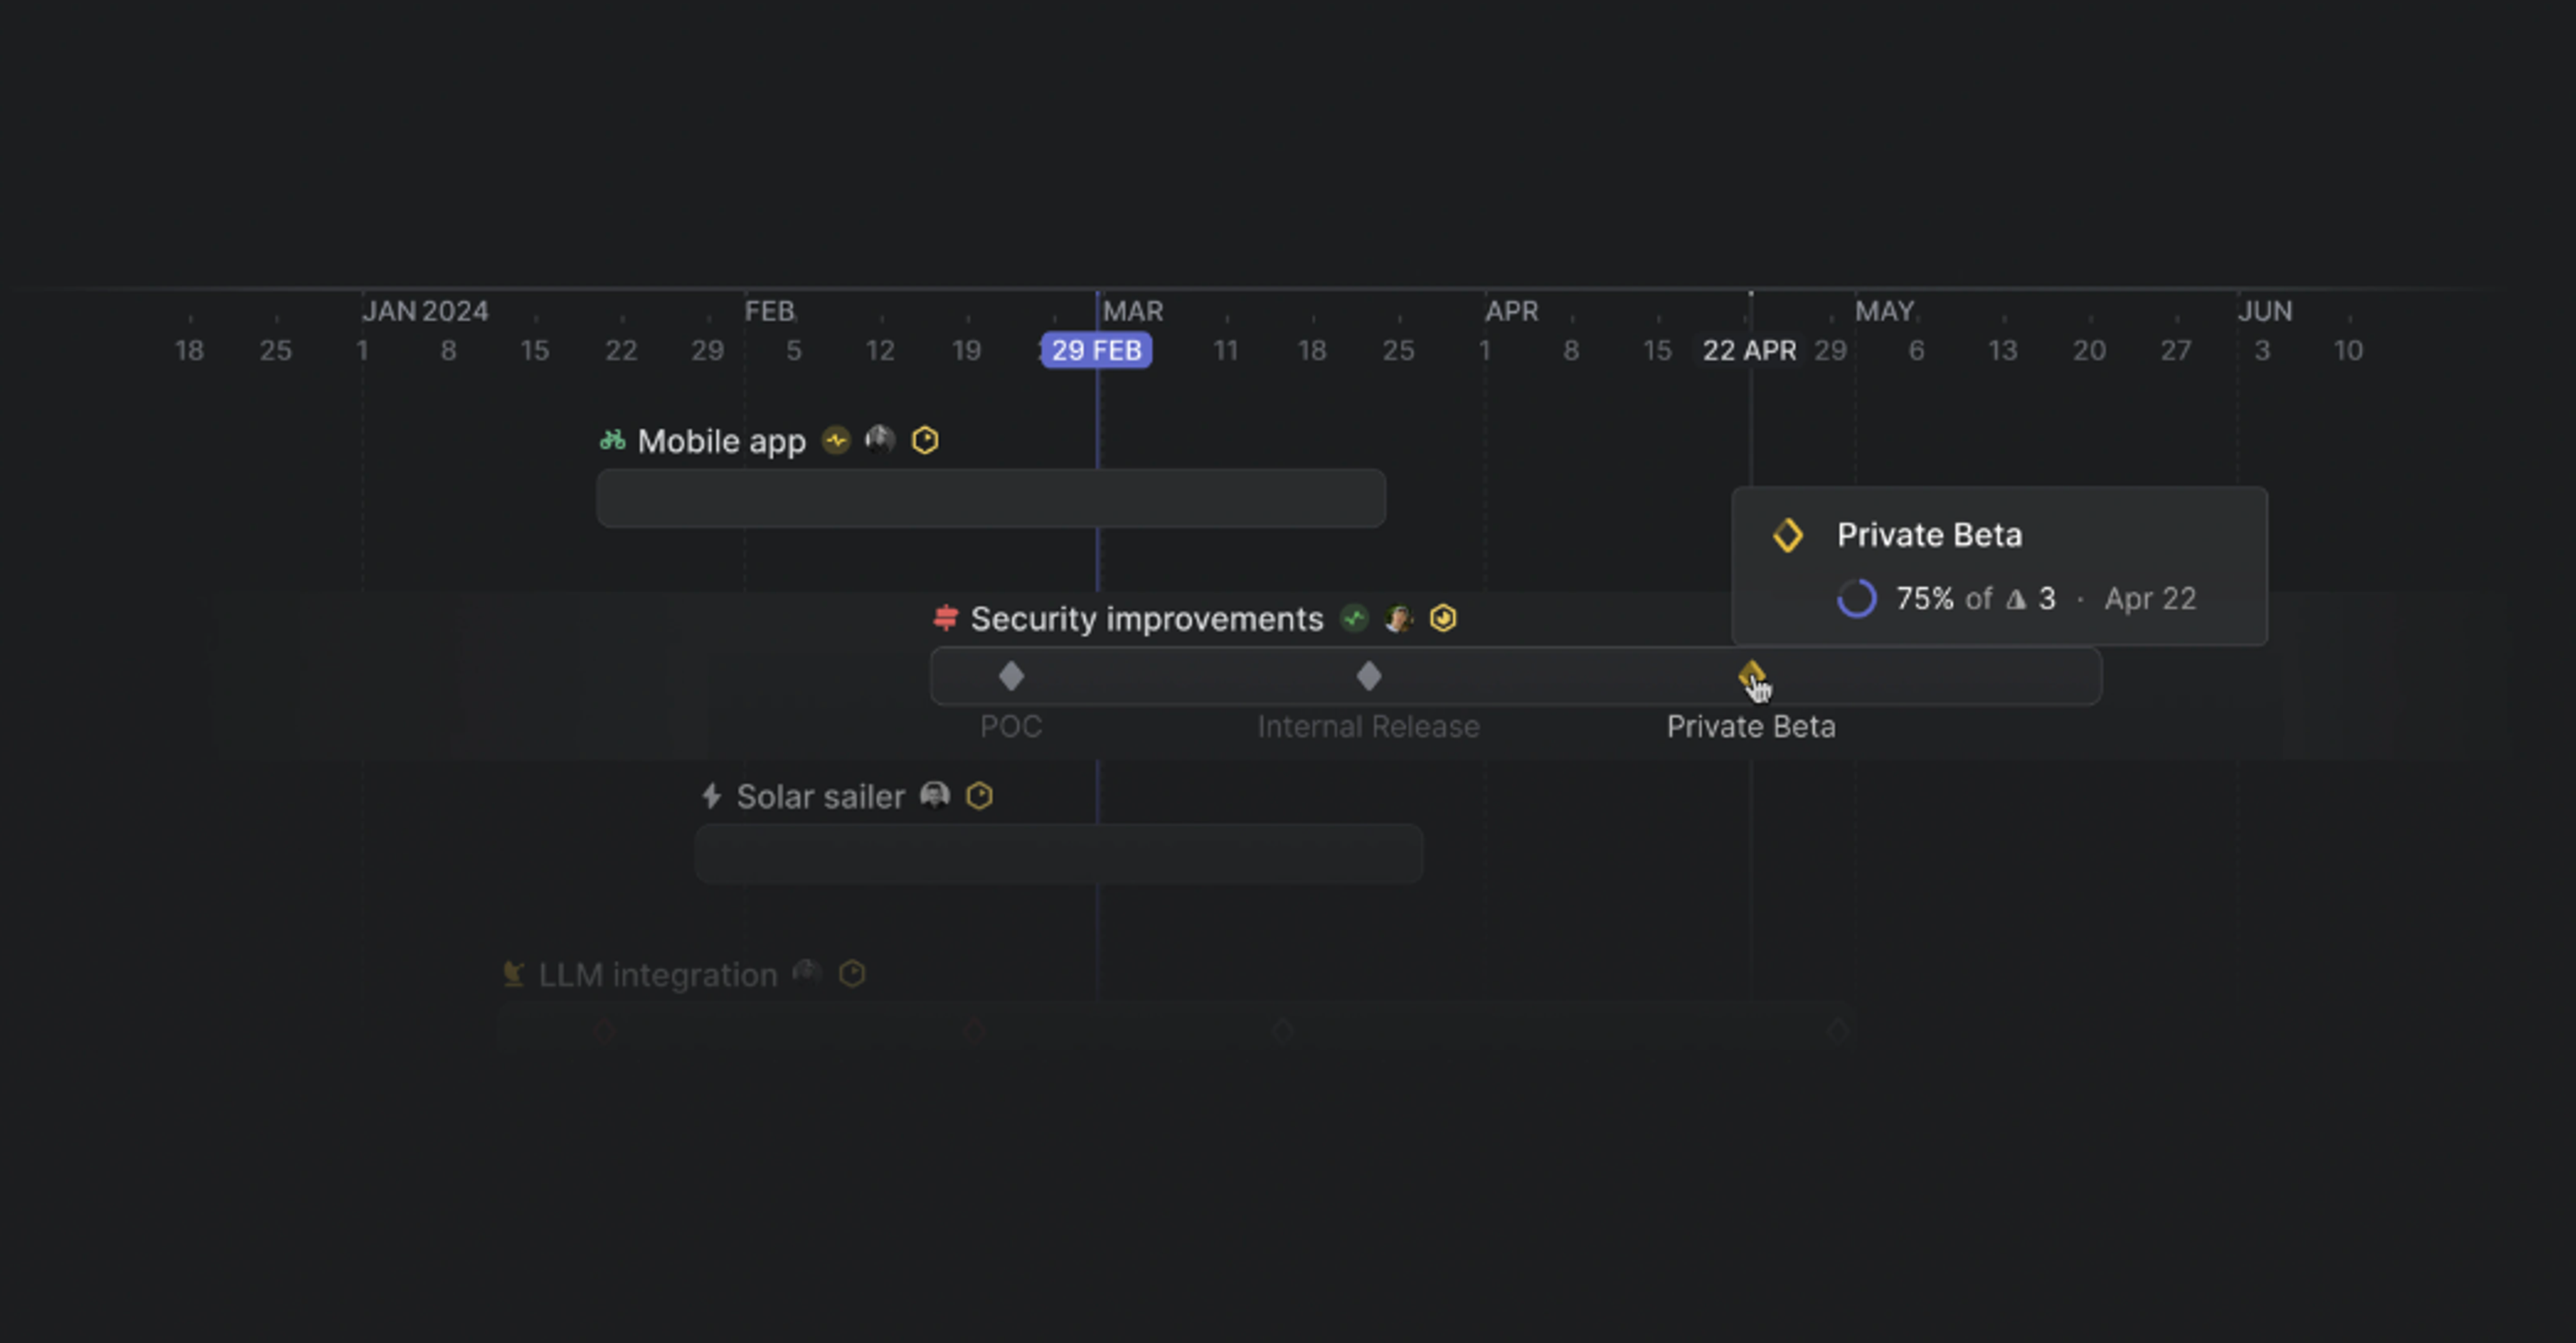 Multiple project milestones visible on a timeline